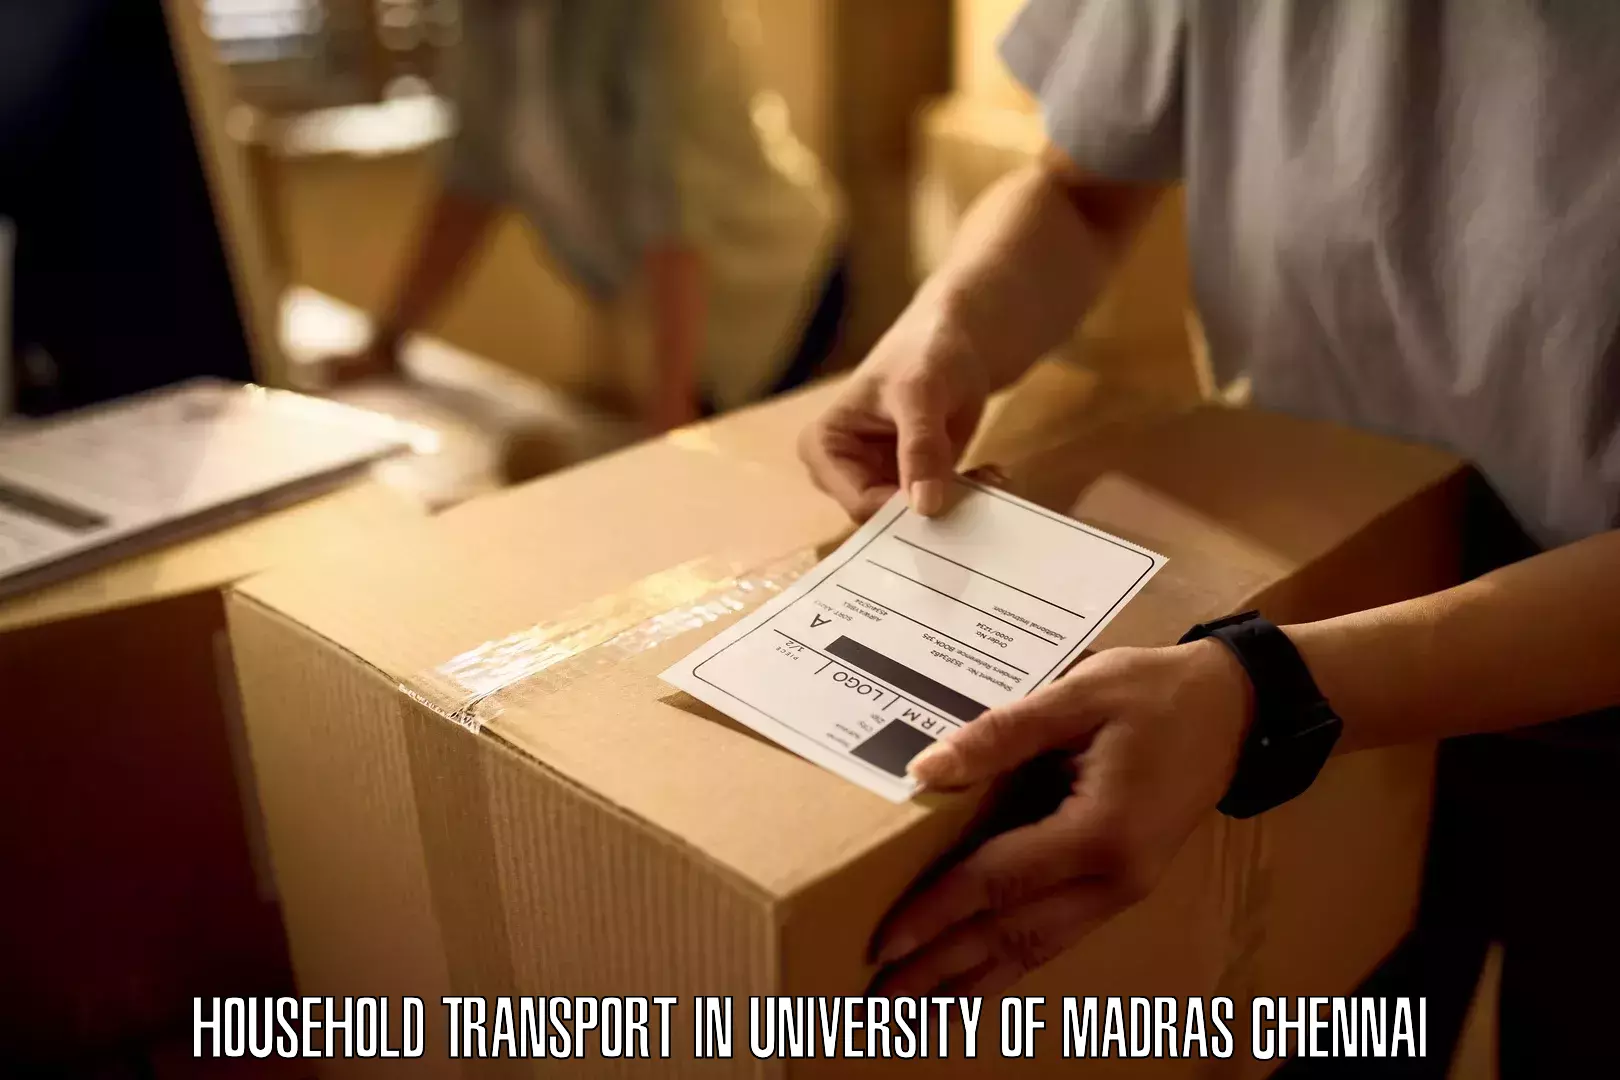 Furniture transport specialists in University of Madras Chennai